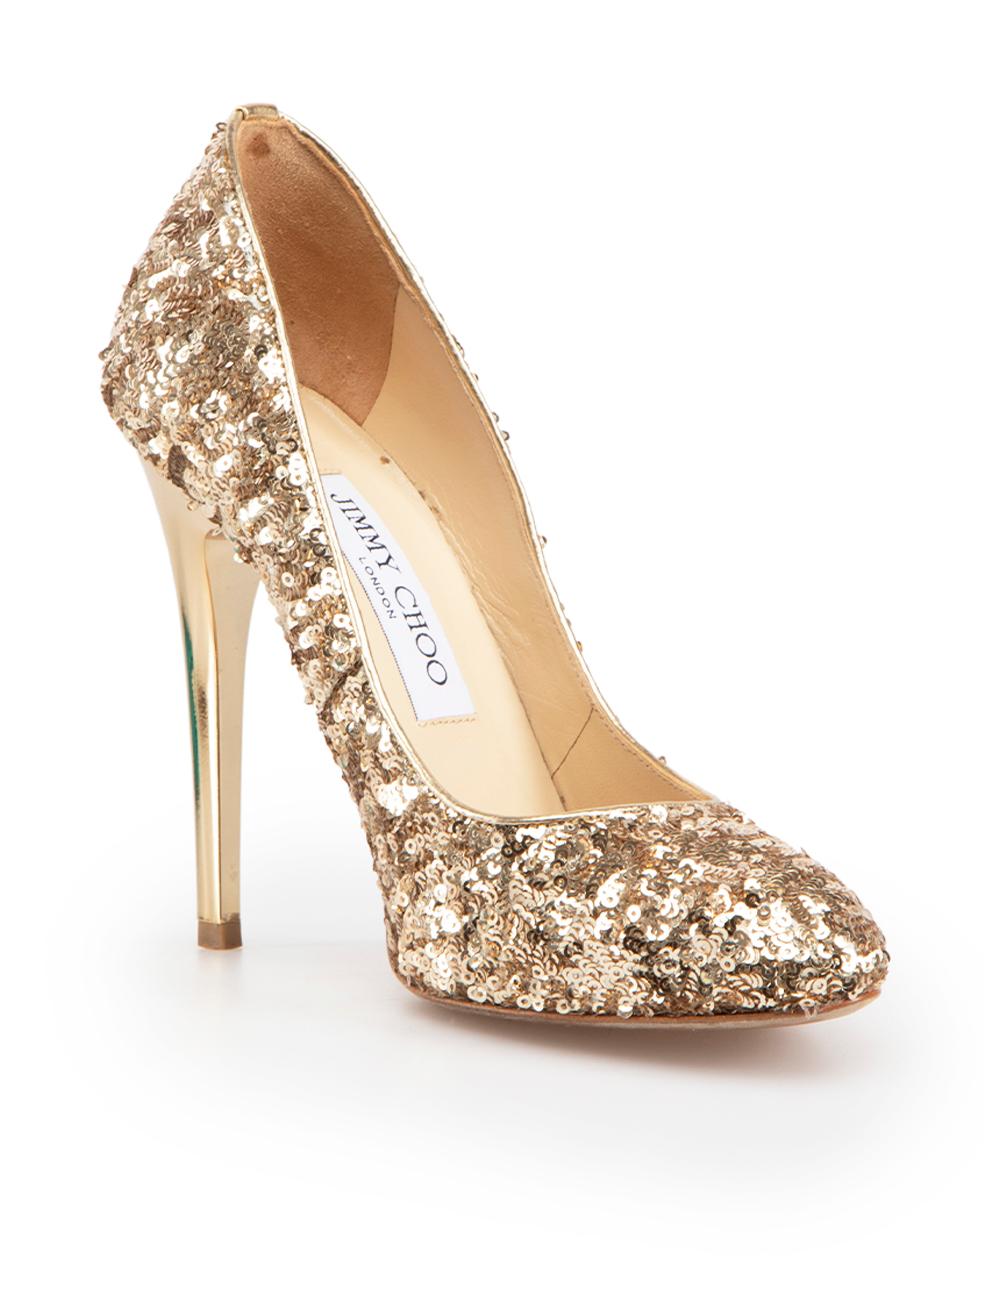 CONDITION is Very good. Minimal wear to shoes is evident. Minimal wear to both shoe heels with very light scratching on this used Jimmy Choo designer resale item. These shoes come with original box and dust bag.
 
 Details
 Victoria
 Gold
 Sequin
